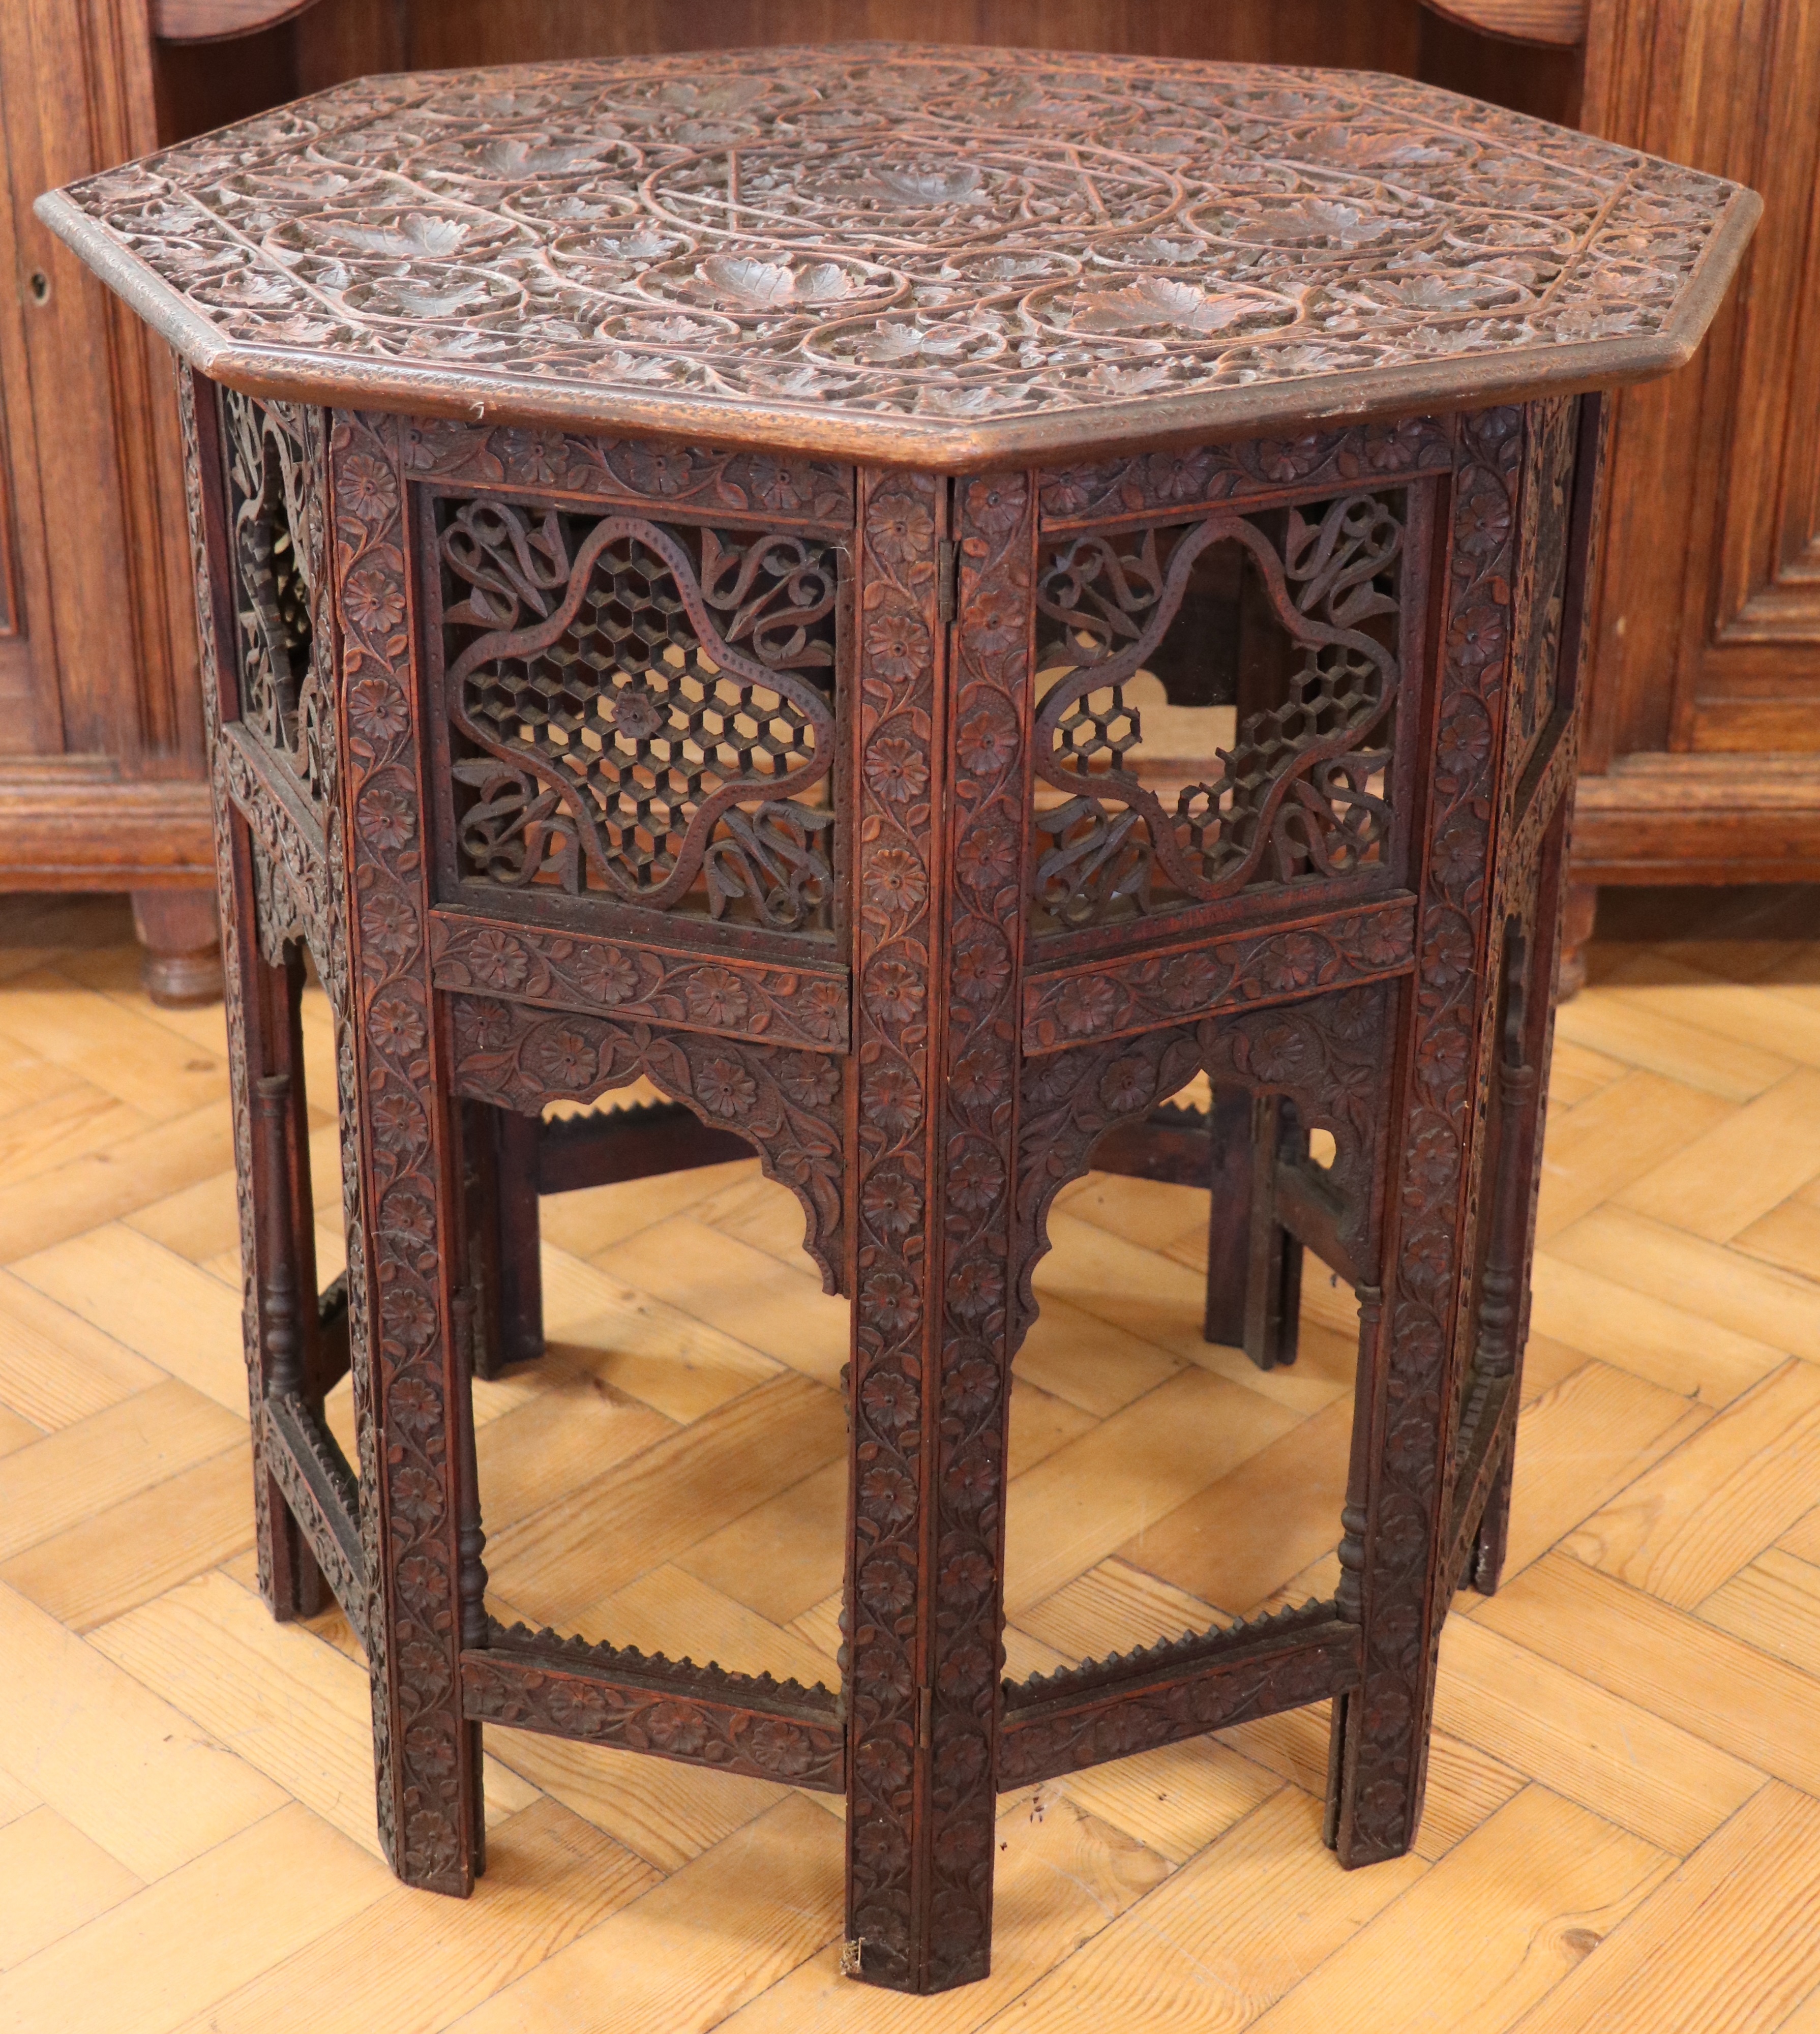 An early 20th Century Indian Hoshiarpur carved wooden folding table, 61 cm x 63 cm high